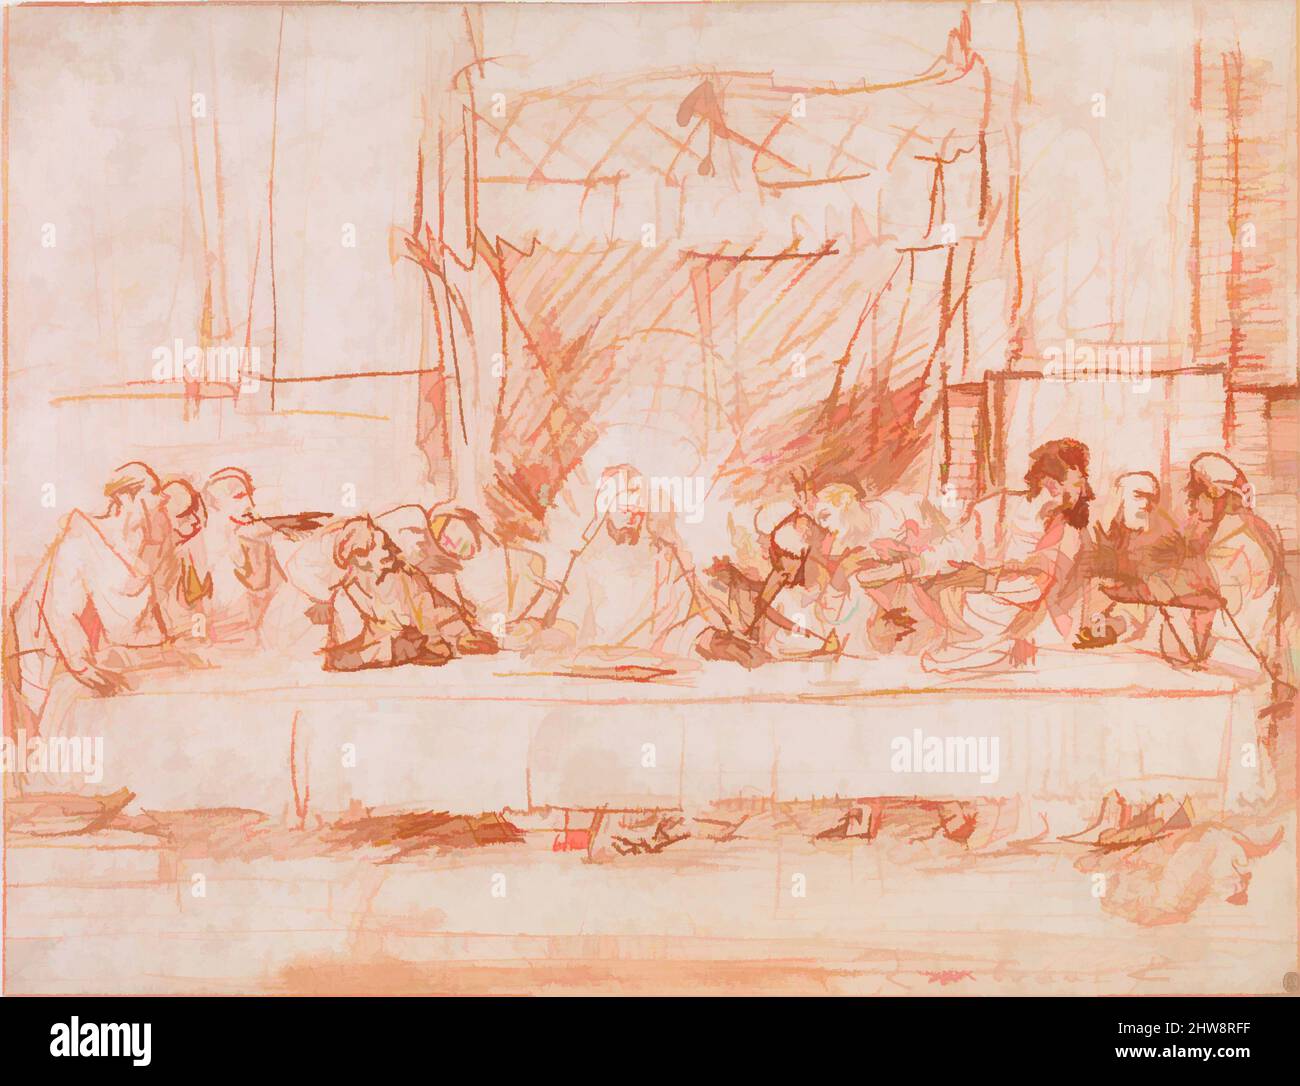 Art inspired by The Last Supper, after Leonardo da Vinci, 1634–35, Red chalk, 14 1/4 x 18 11/16 in. (36.2 x 47.5 cm), Drawings, Rembrandt (Rembrandt van Rijn) (Dutch, Leiden 1606–1669 Amsterdam), This unusually large red-chalk drawing by Rembrandt is closely based on an early print, Classic works modernized by Artotop with a splash of modernity. Shapes, color and value, eye-catching visual impact on art. Emotions through freedom of artworks in a contemporary way. A timeless message pursuing a wildly creative new direction. Artists turning to the digital medium and creating the Artotop NFT Stock Photo